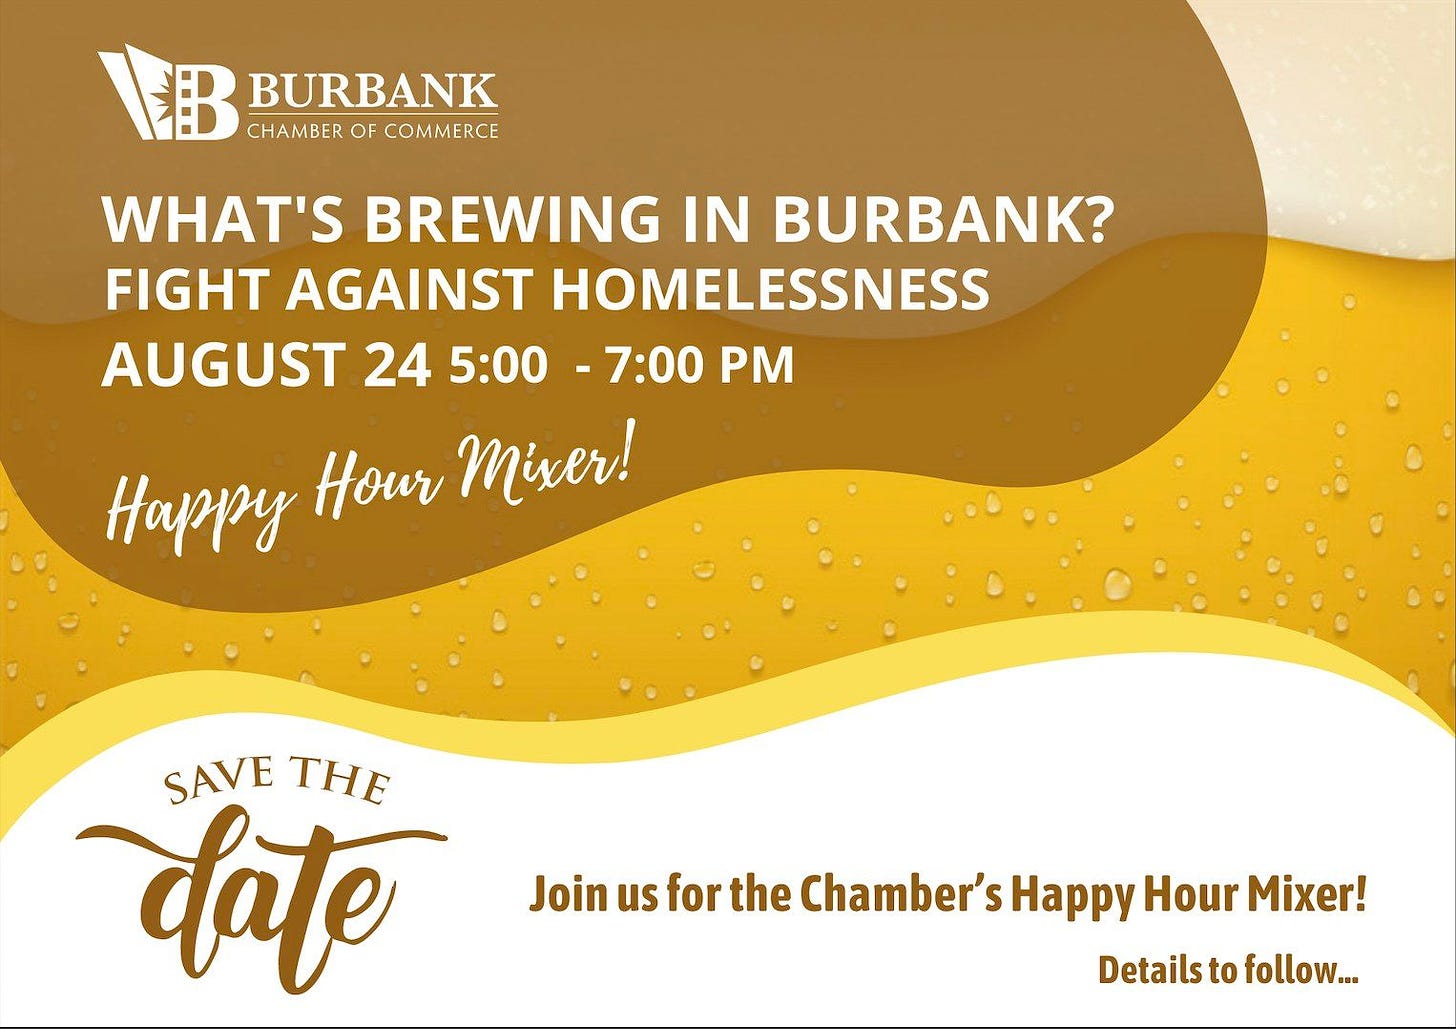 May be an image of one or more people and text that says 'BURBANK CHAMBER OF COMMERCE WHAT'S BREWING IN BURBANK? FIGHT AGAINST HOMELESSNESS AUGUST 24 5:00 -7:00 PM Happy Hour Mixer! SAVE THE date Join us for the Chamber's Happy Hour Mixer! Details to follow...'